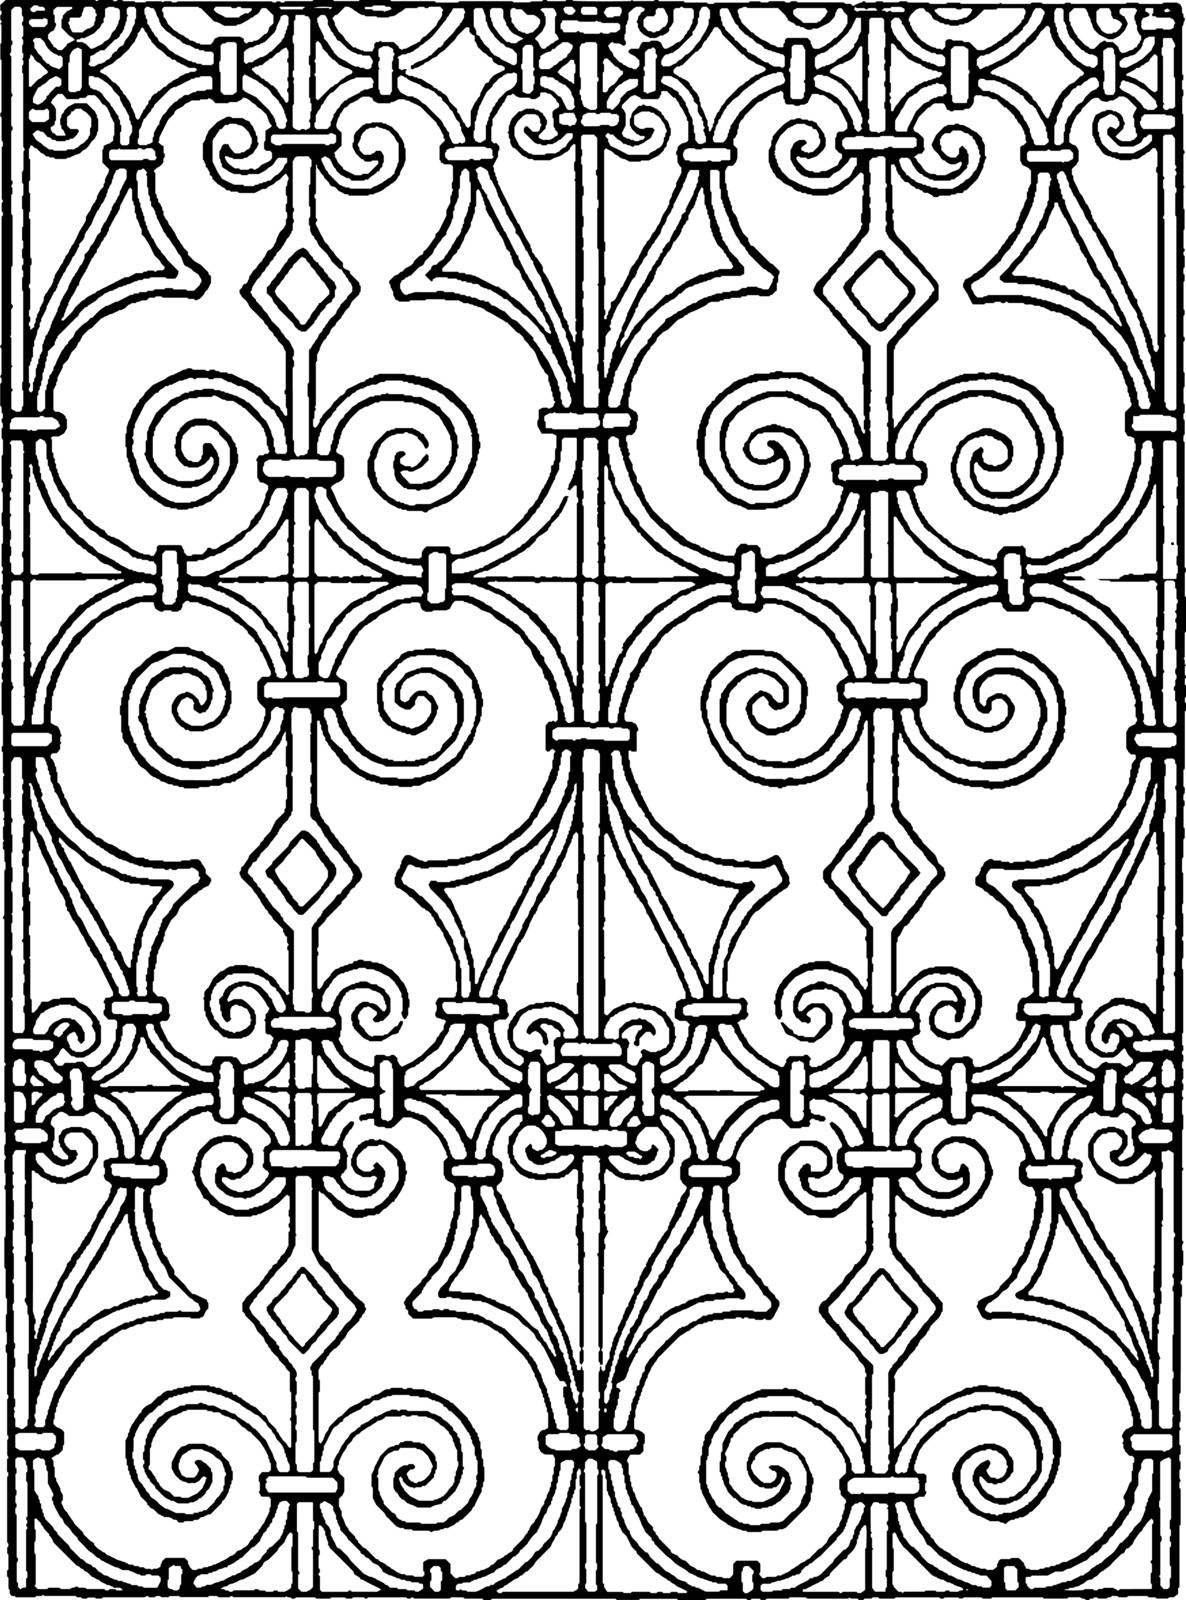 Italian Renaissance Pattern  is a repeating scroll-like ornament by Morphart